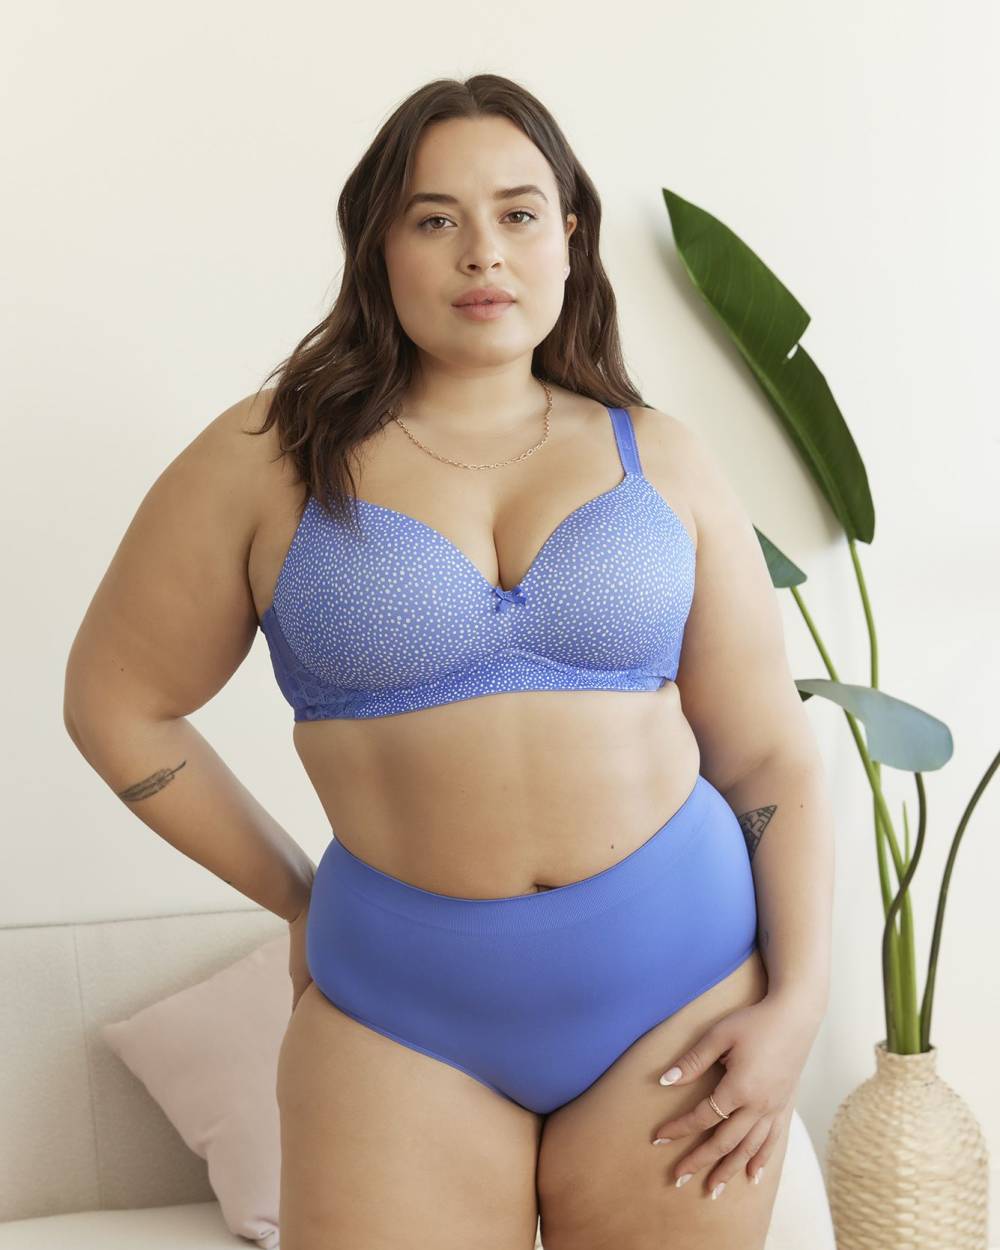 Dotted Microfibre Wireless Plunge Bra - Déesse Collection